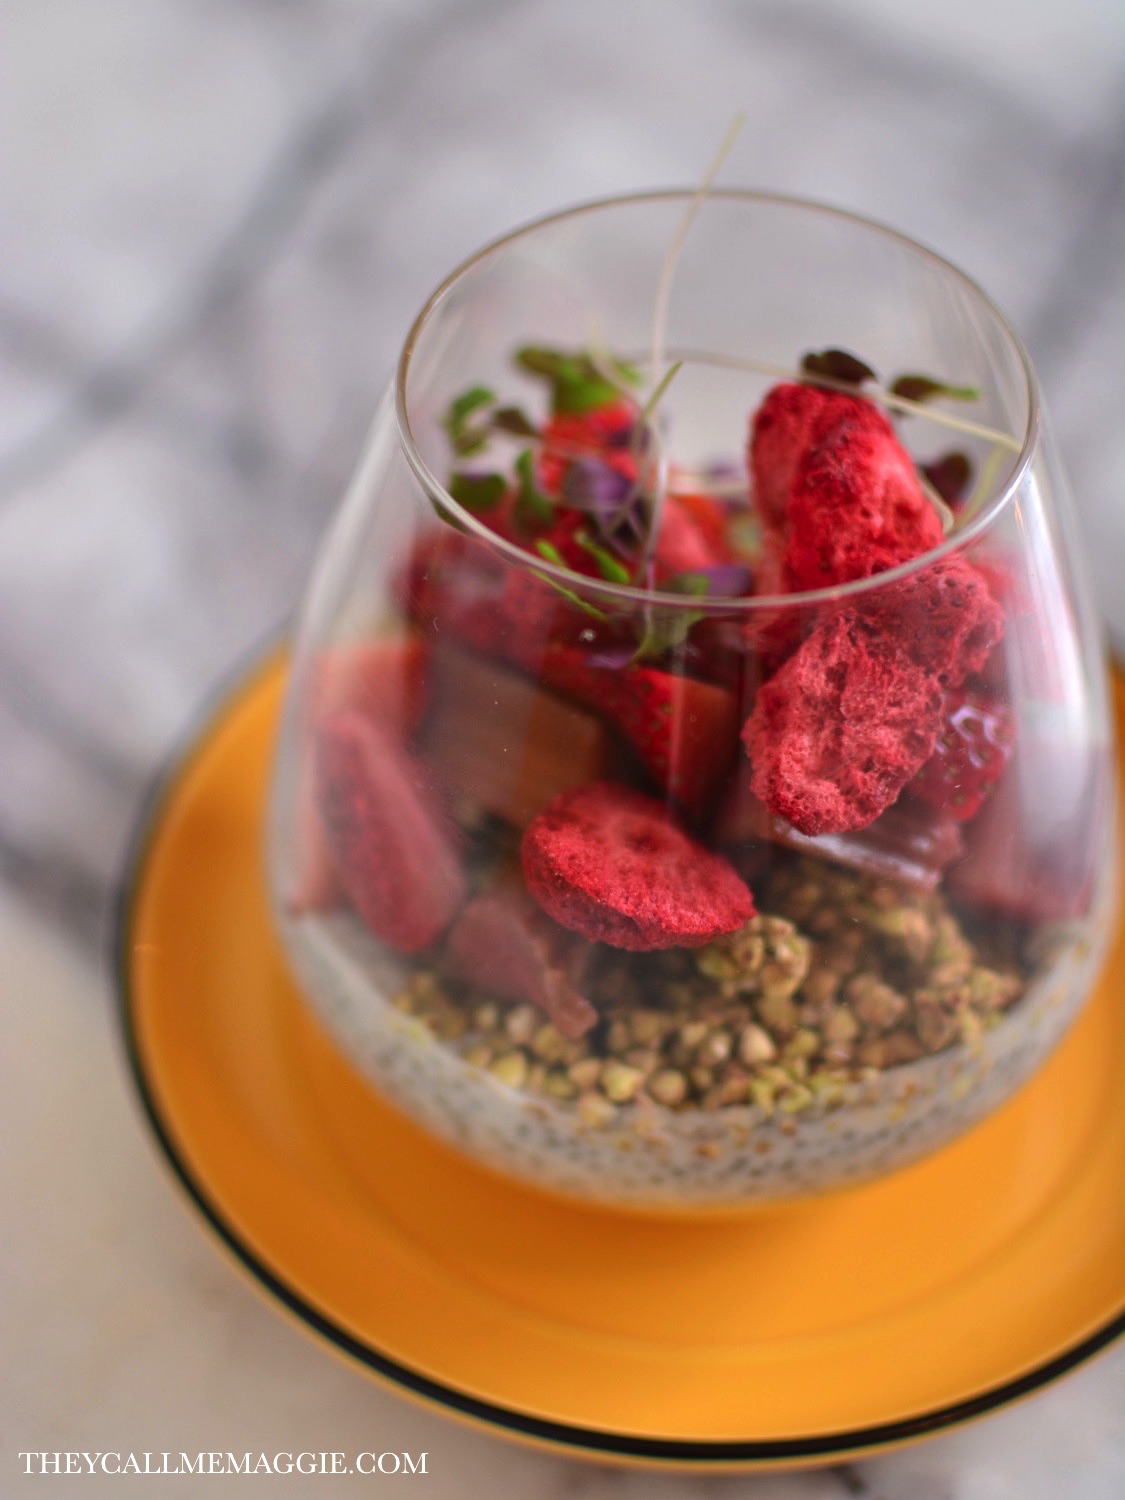  Chia seed pudding - with lemon curd, buckinis, rhubarb and strawberries.&nbsp; 